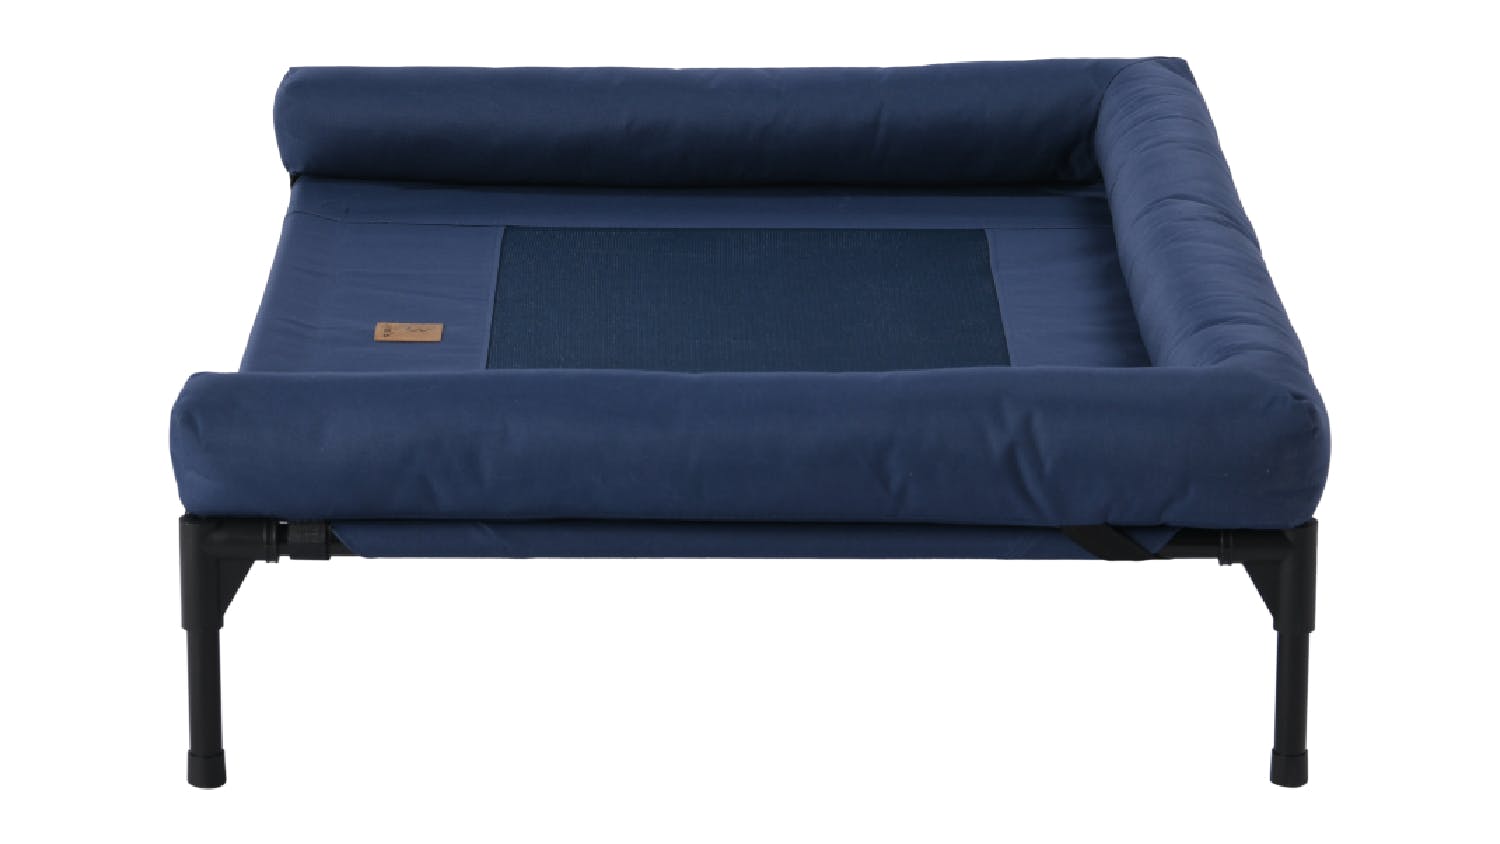 Charlie's levated Hammock Pet Bed w/ Bolster Support Large - Blue